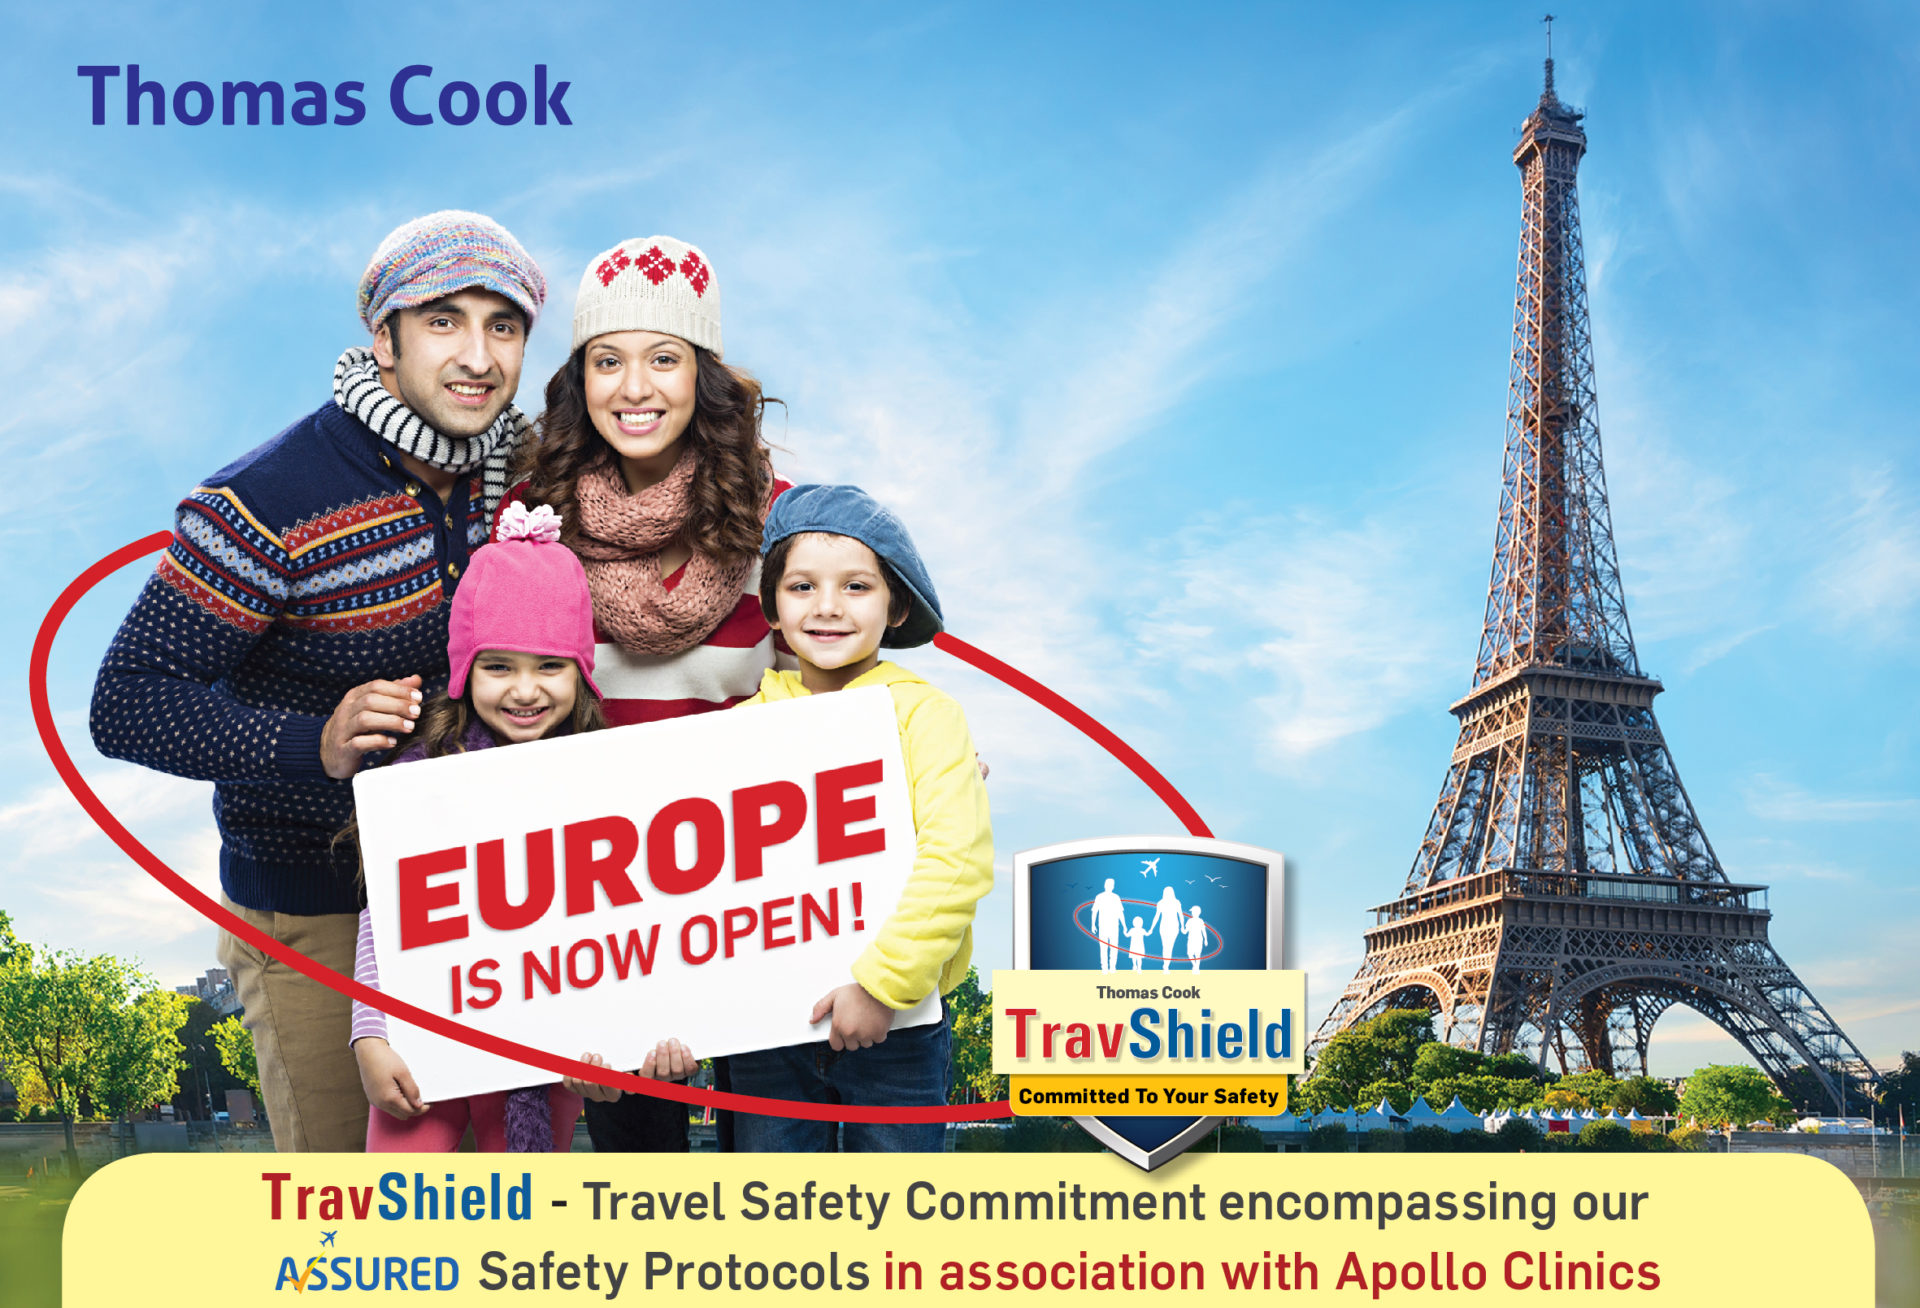 With reopening of European destinations Thomas Cook India & SOTC